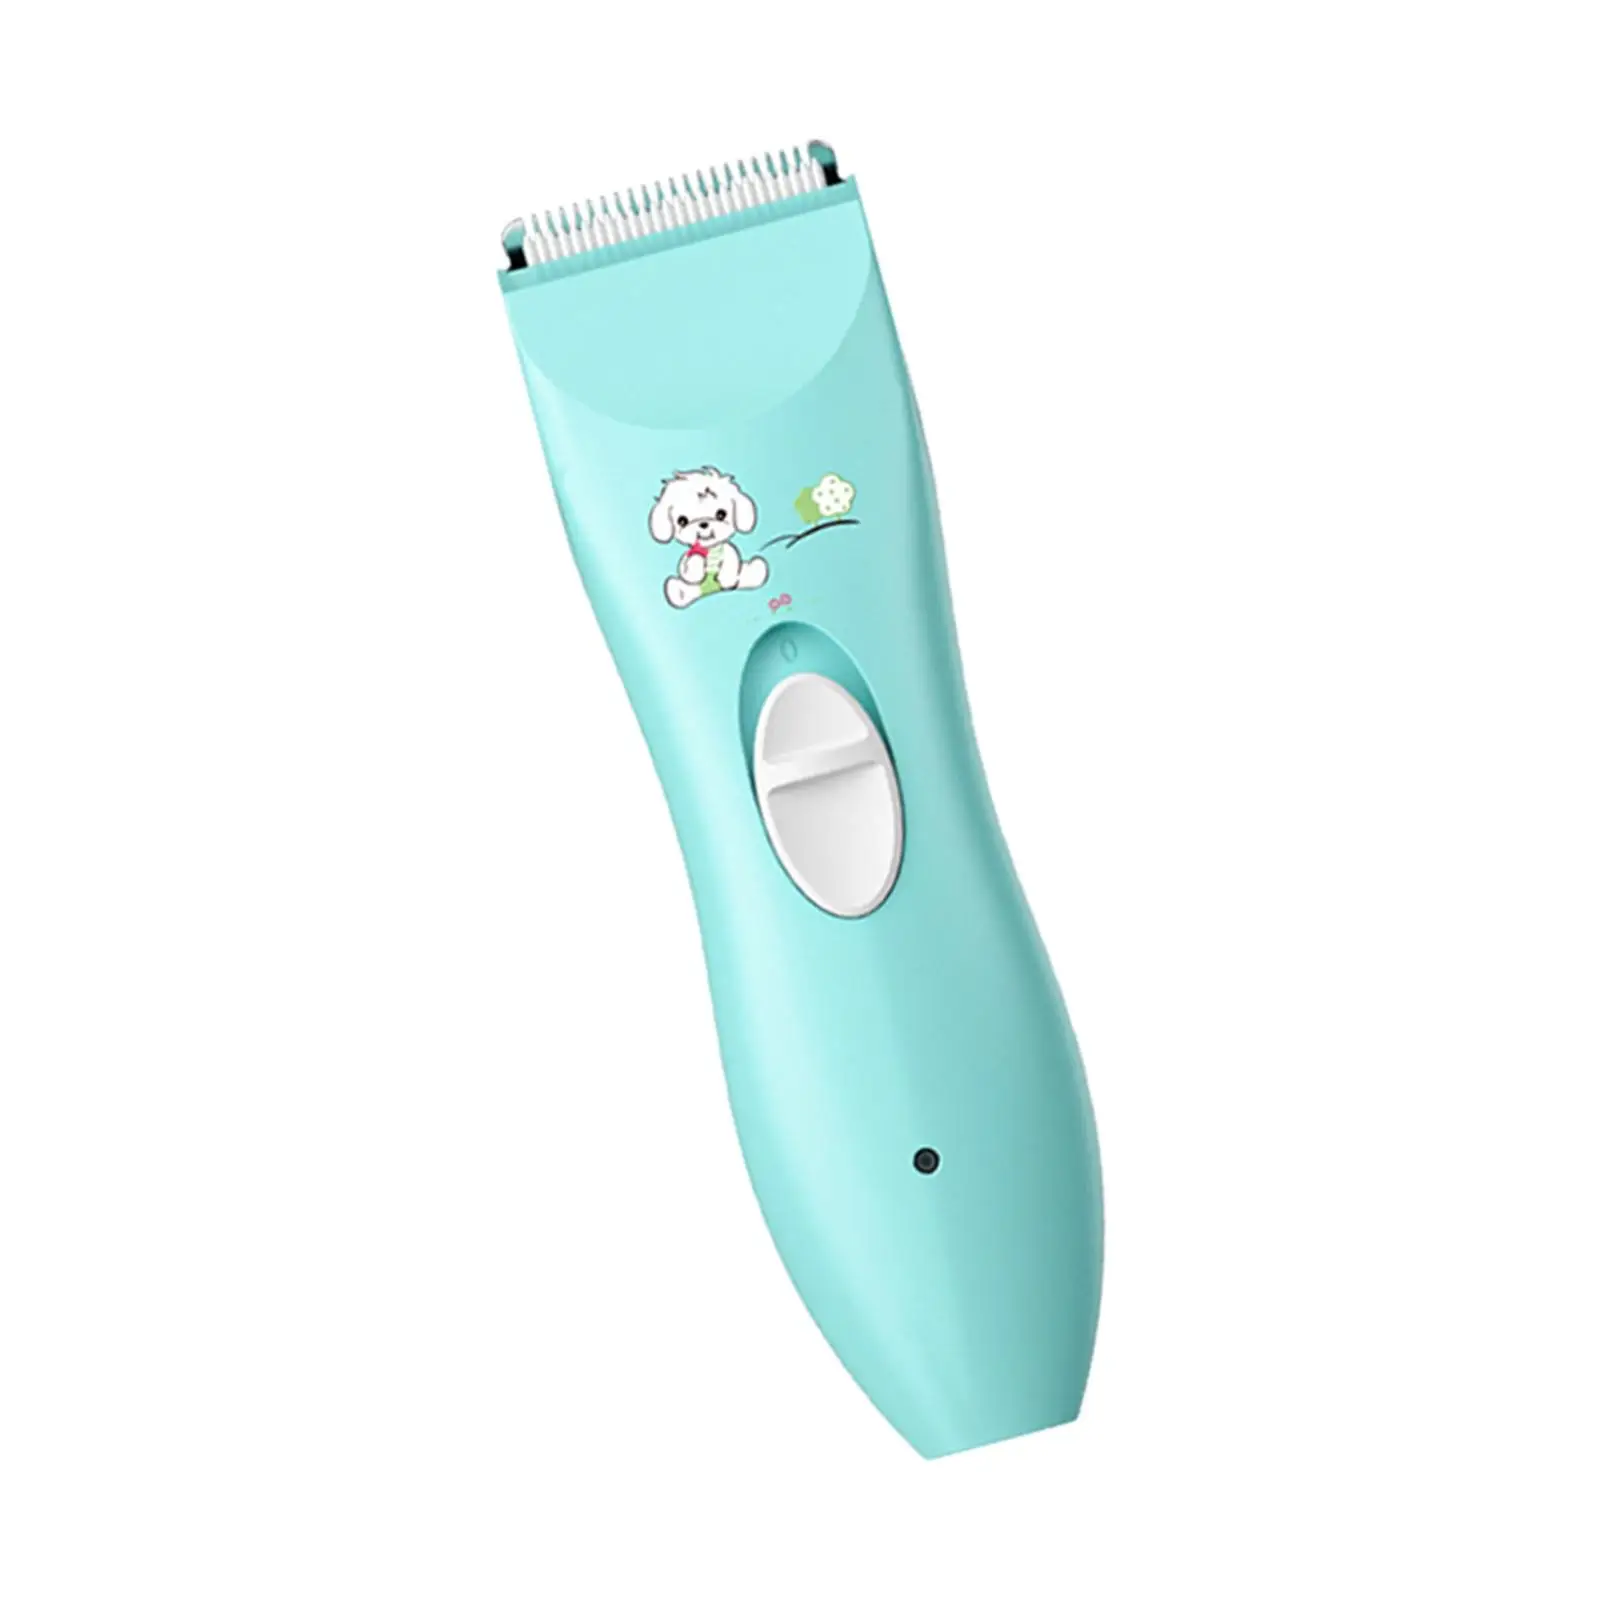  children hair Clippers USB Charging ,   Delicate Skin Against Scratches and Cuts Ceramic Blade Head Low Noise Haircut